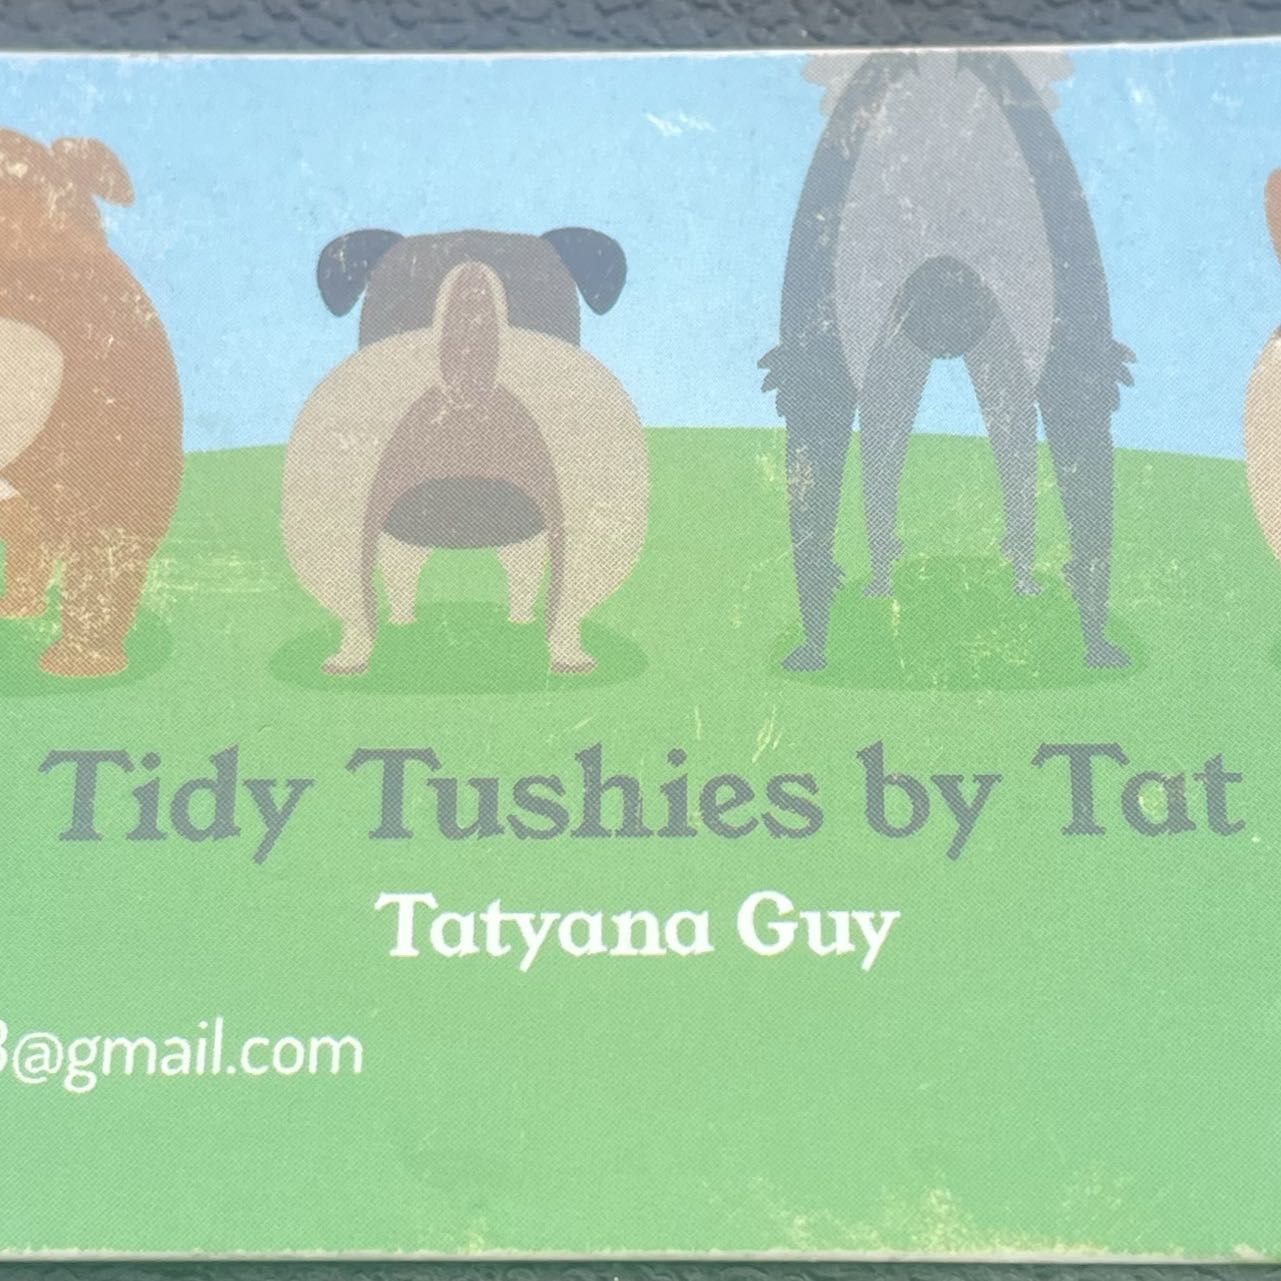 Tidy Tushies, S Campbell Ave, Tucson, 85706